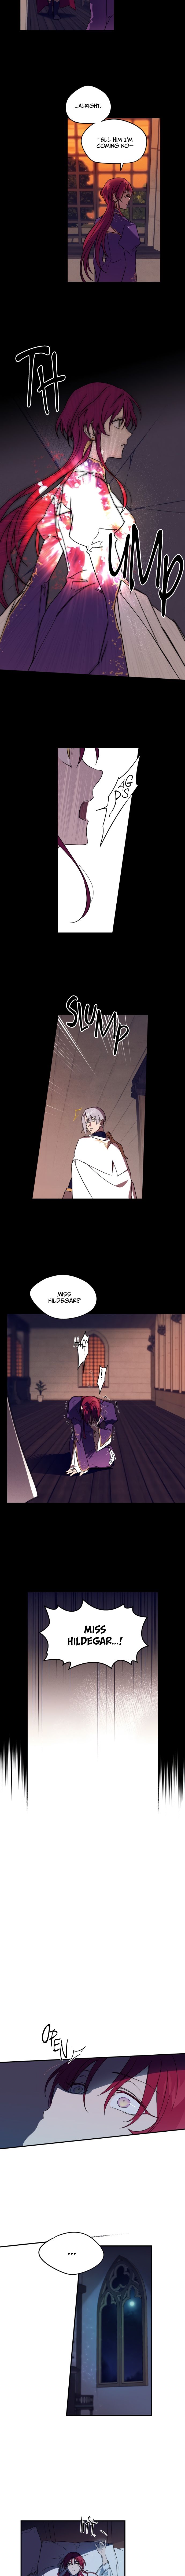 Blinded by the Setting Sun - Chapter 3 Page 6